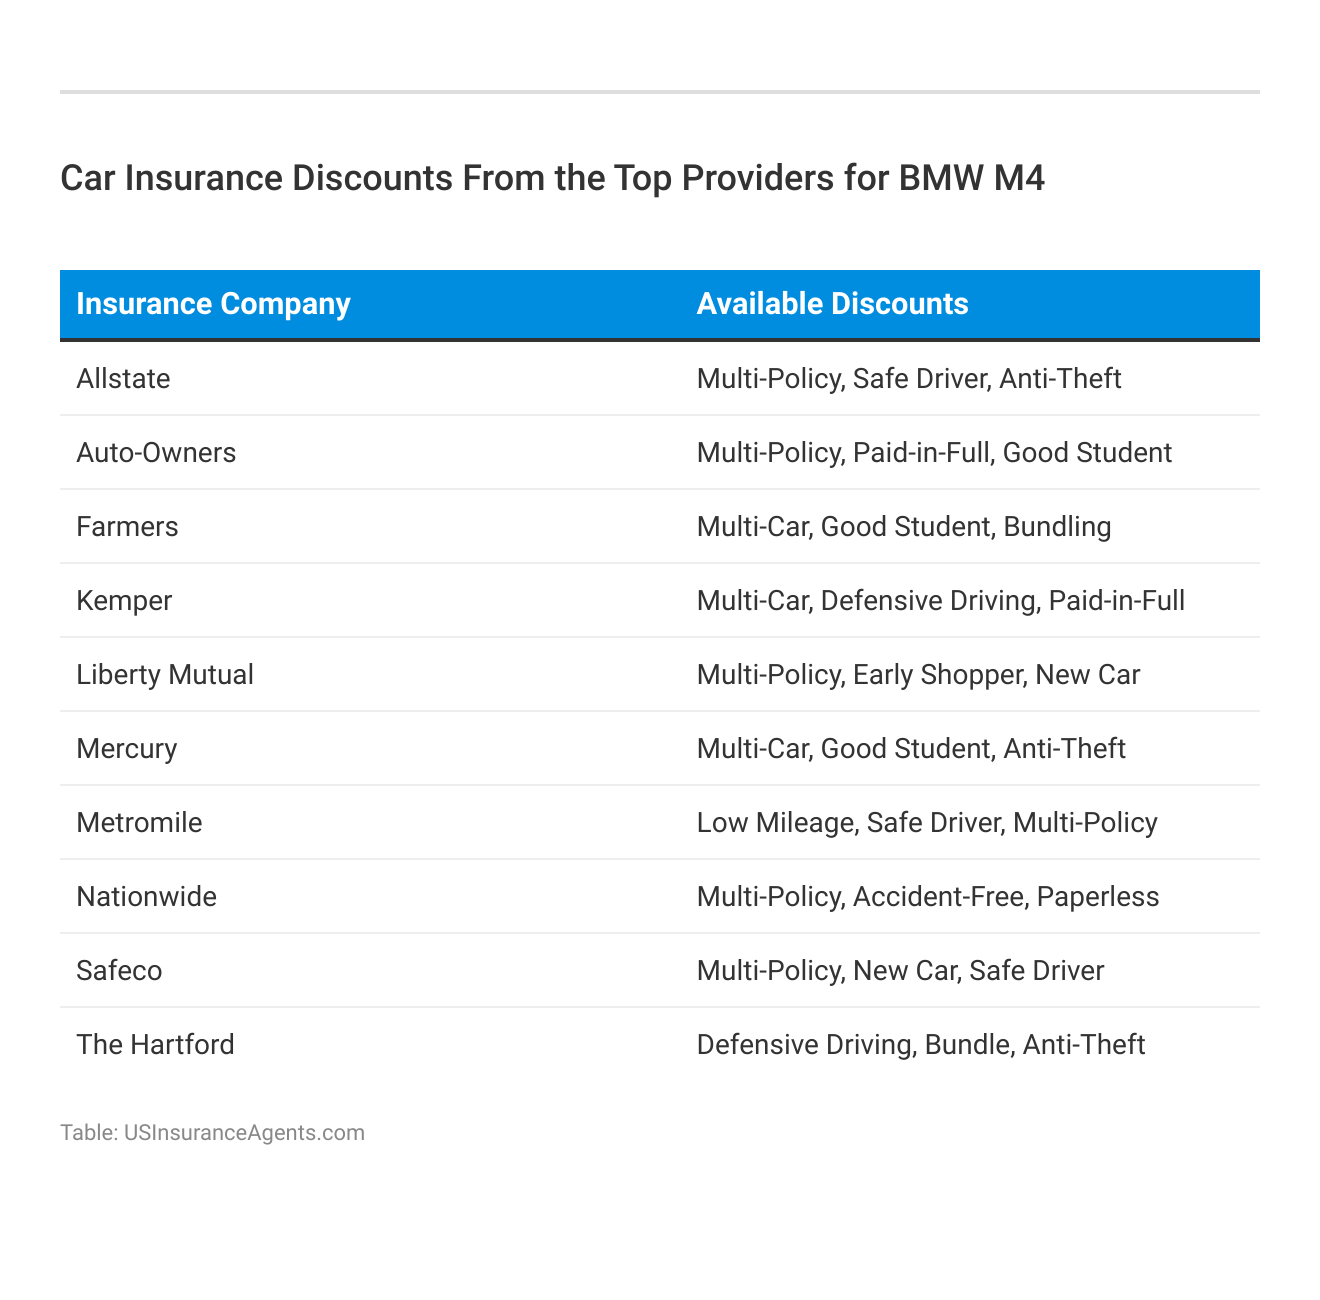 <h3>Car Insurance Discounts From the Top Providers for BMW M4</h3>